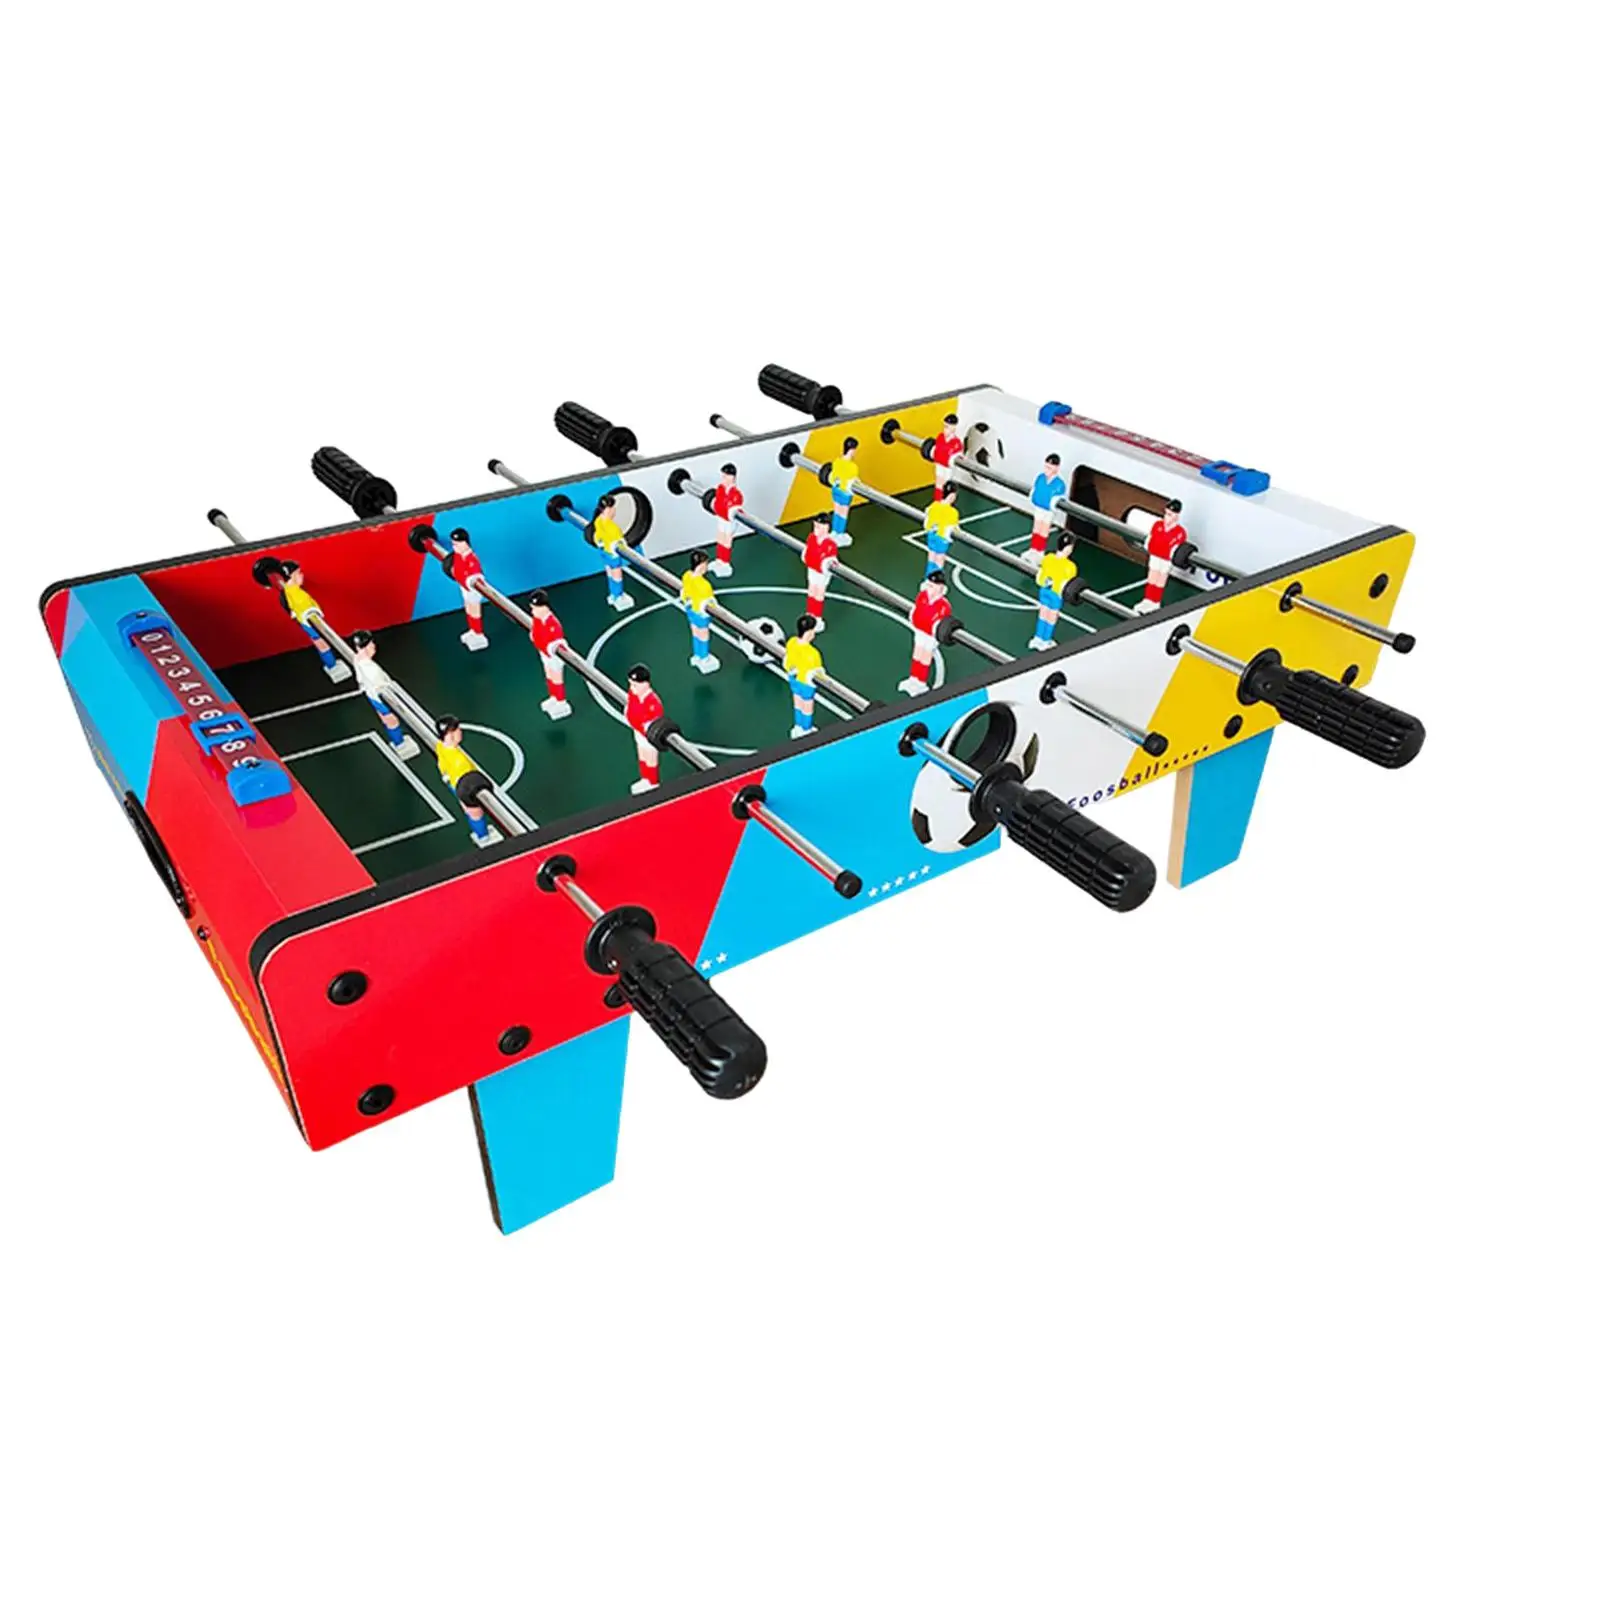 Compact Mini Foosball Table Intellectual Developmental Interactive Motor Skills Tabletop Football Game for Family Game Travel